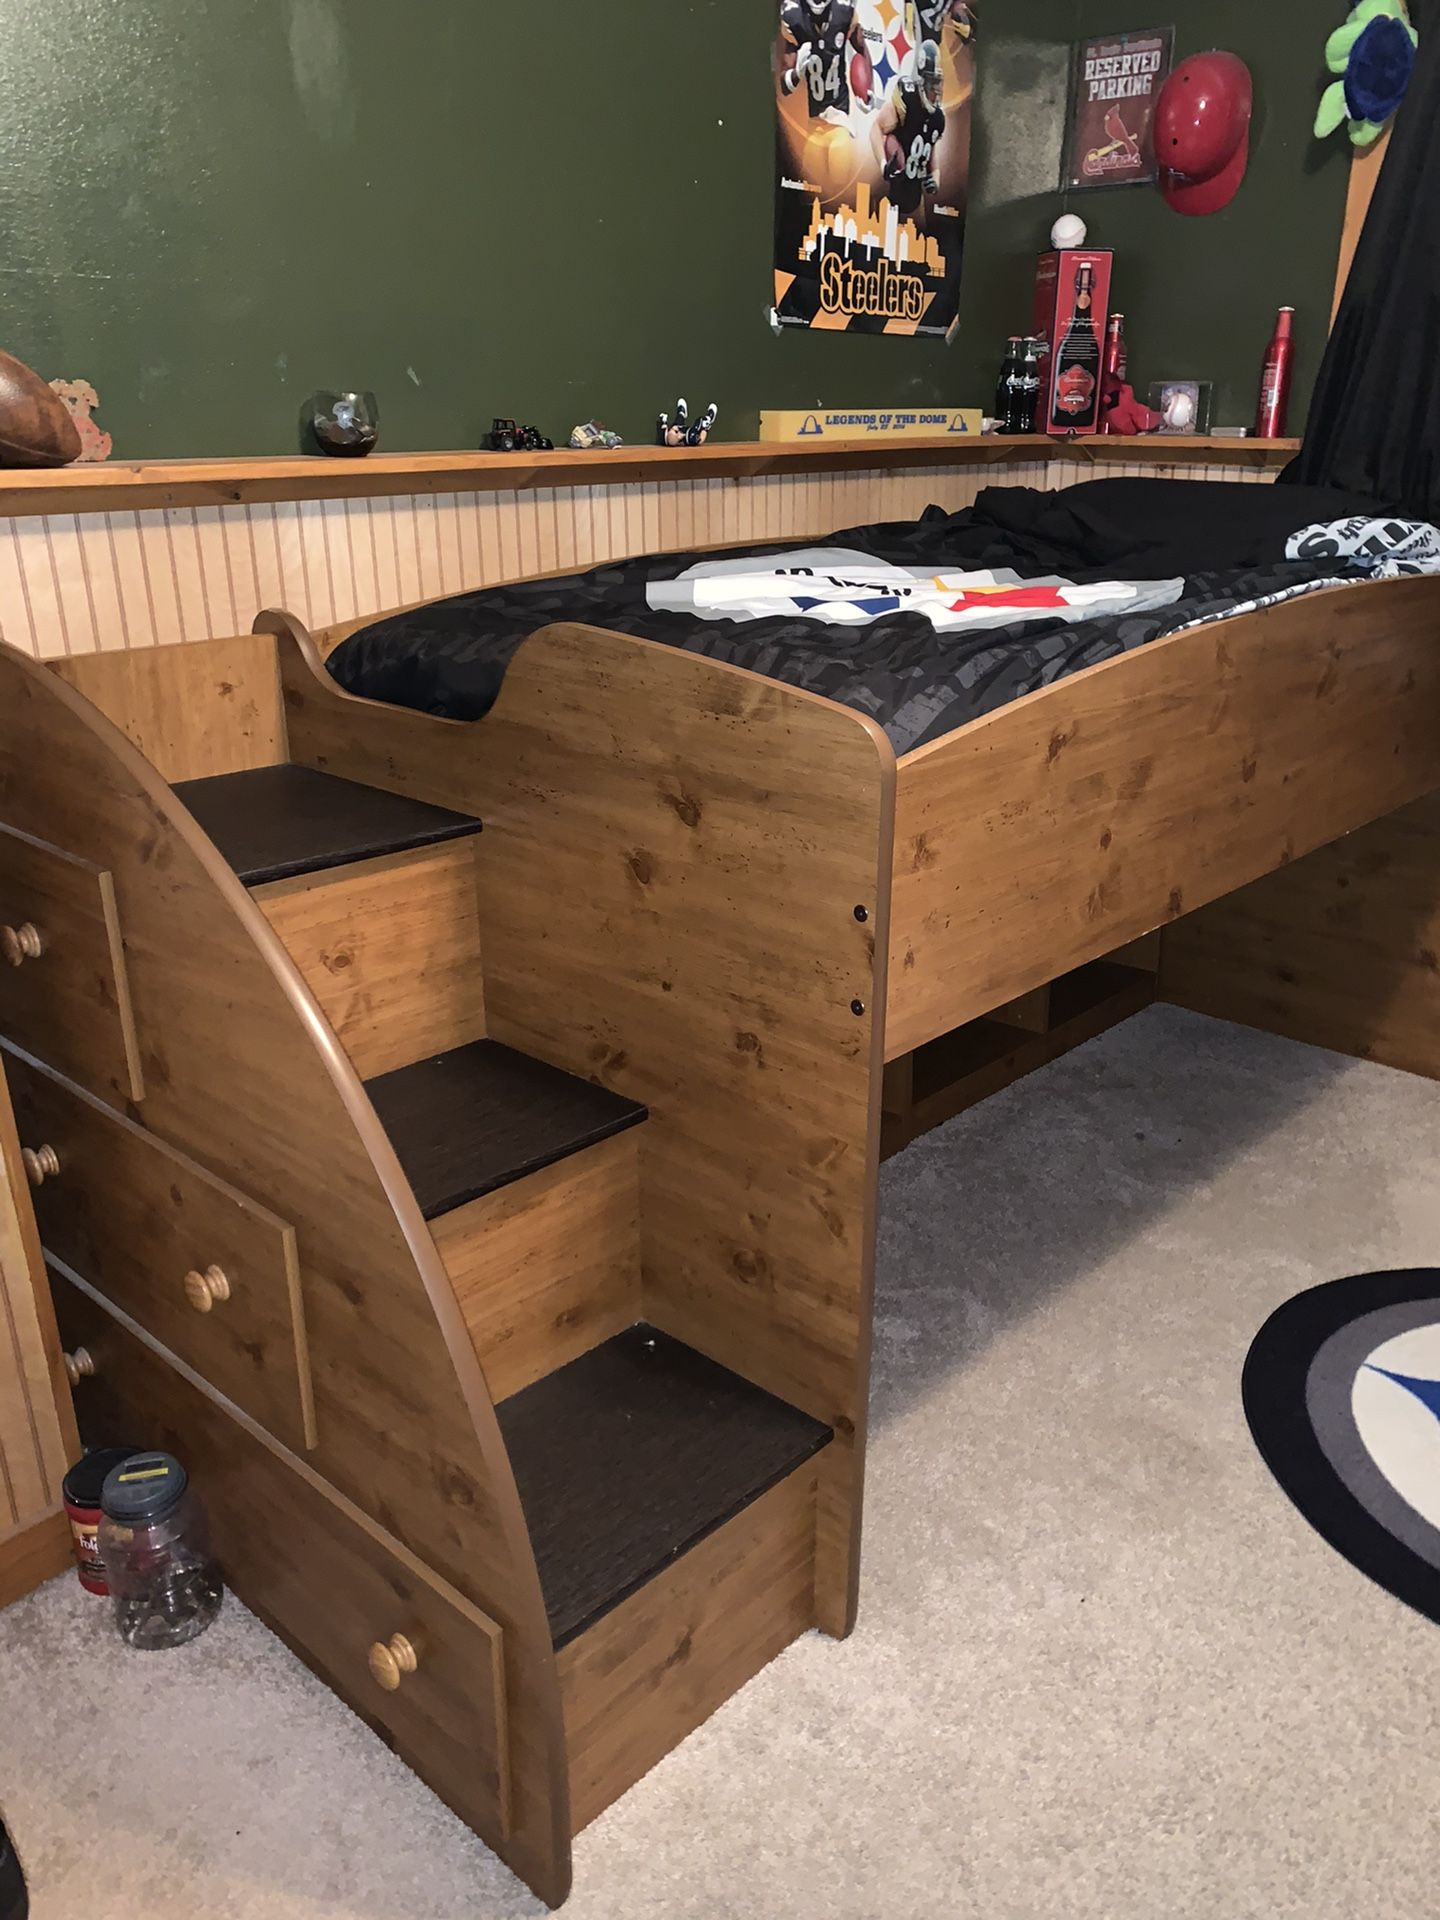 Loft twin bed, includes mattress, stairs with drawers, shelves underneath, dresser with mirror